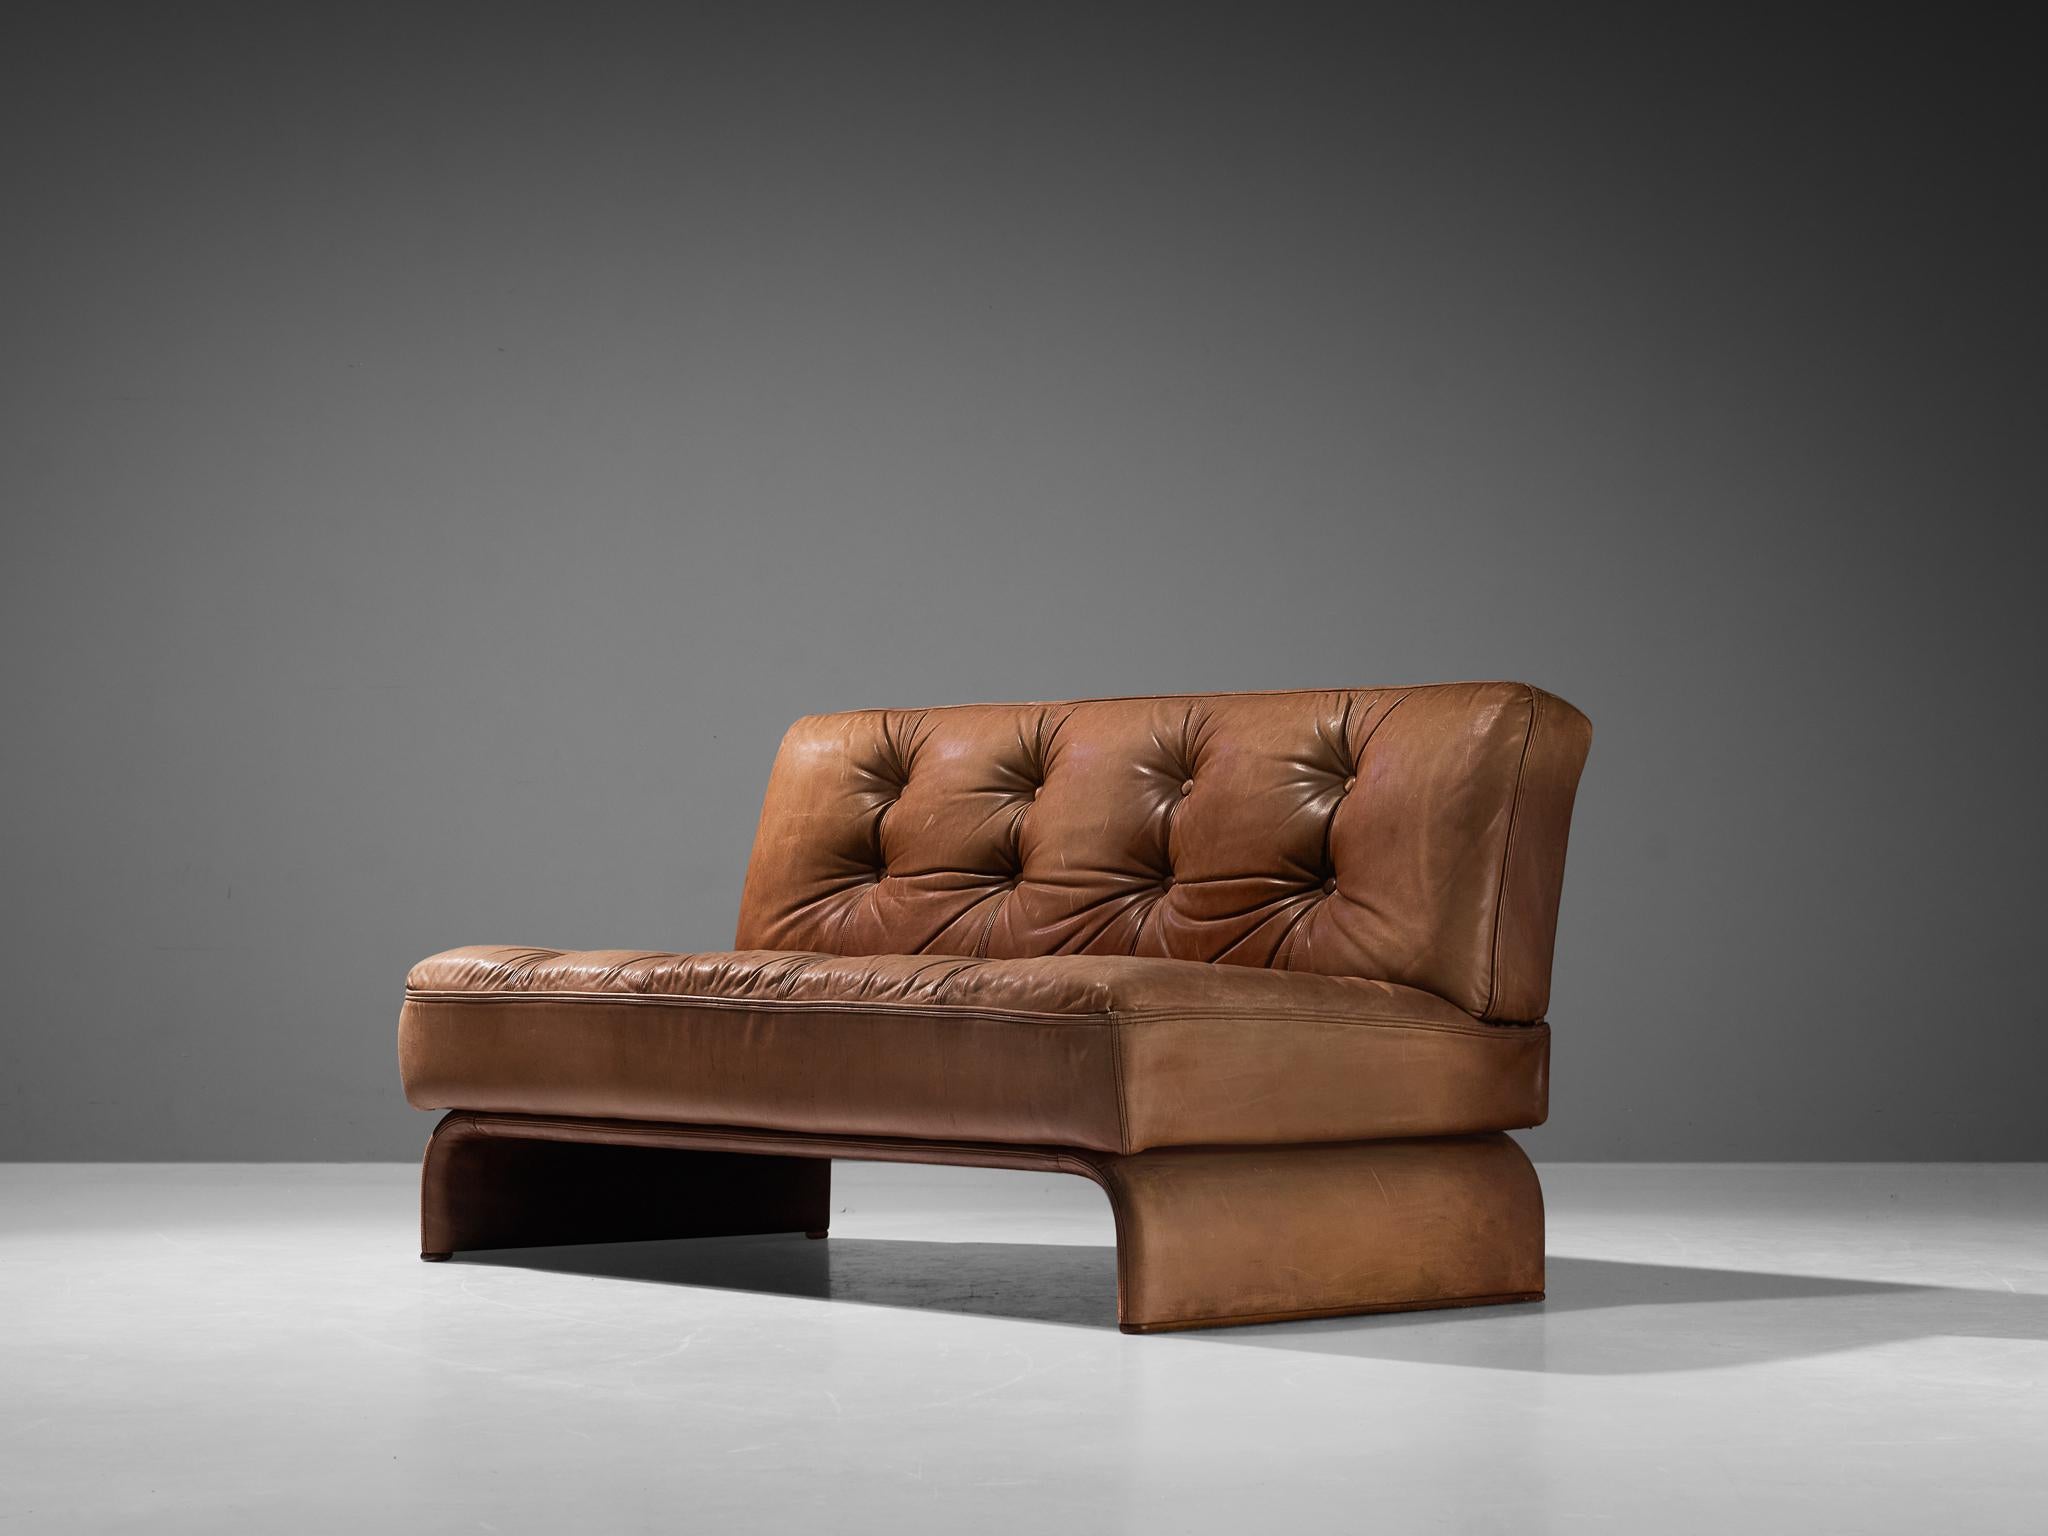 Johannes Spalt for Wittmann 'Constanze' Sofa or Daybed in Cognac Leather  In Good Condition For Sale In Waalwijk, NL